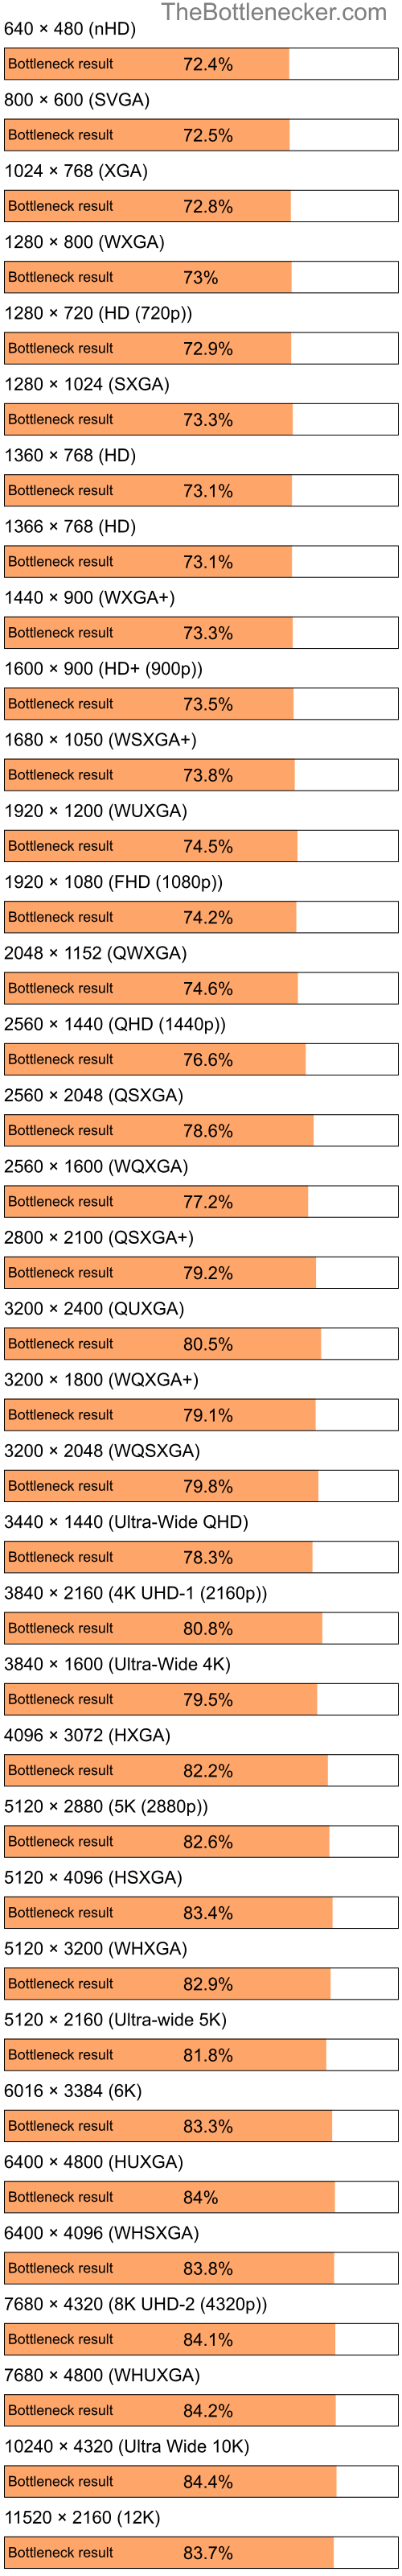 Bottleneck results by resolution for Intel Pentium 4 and AMD Mobility Radeon X600 in General Tasks